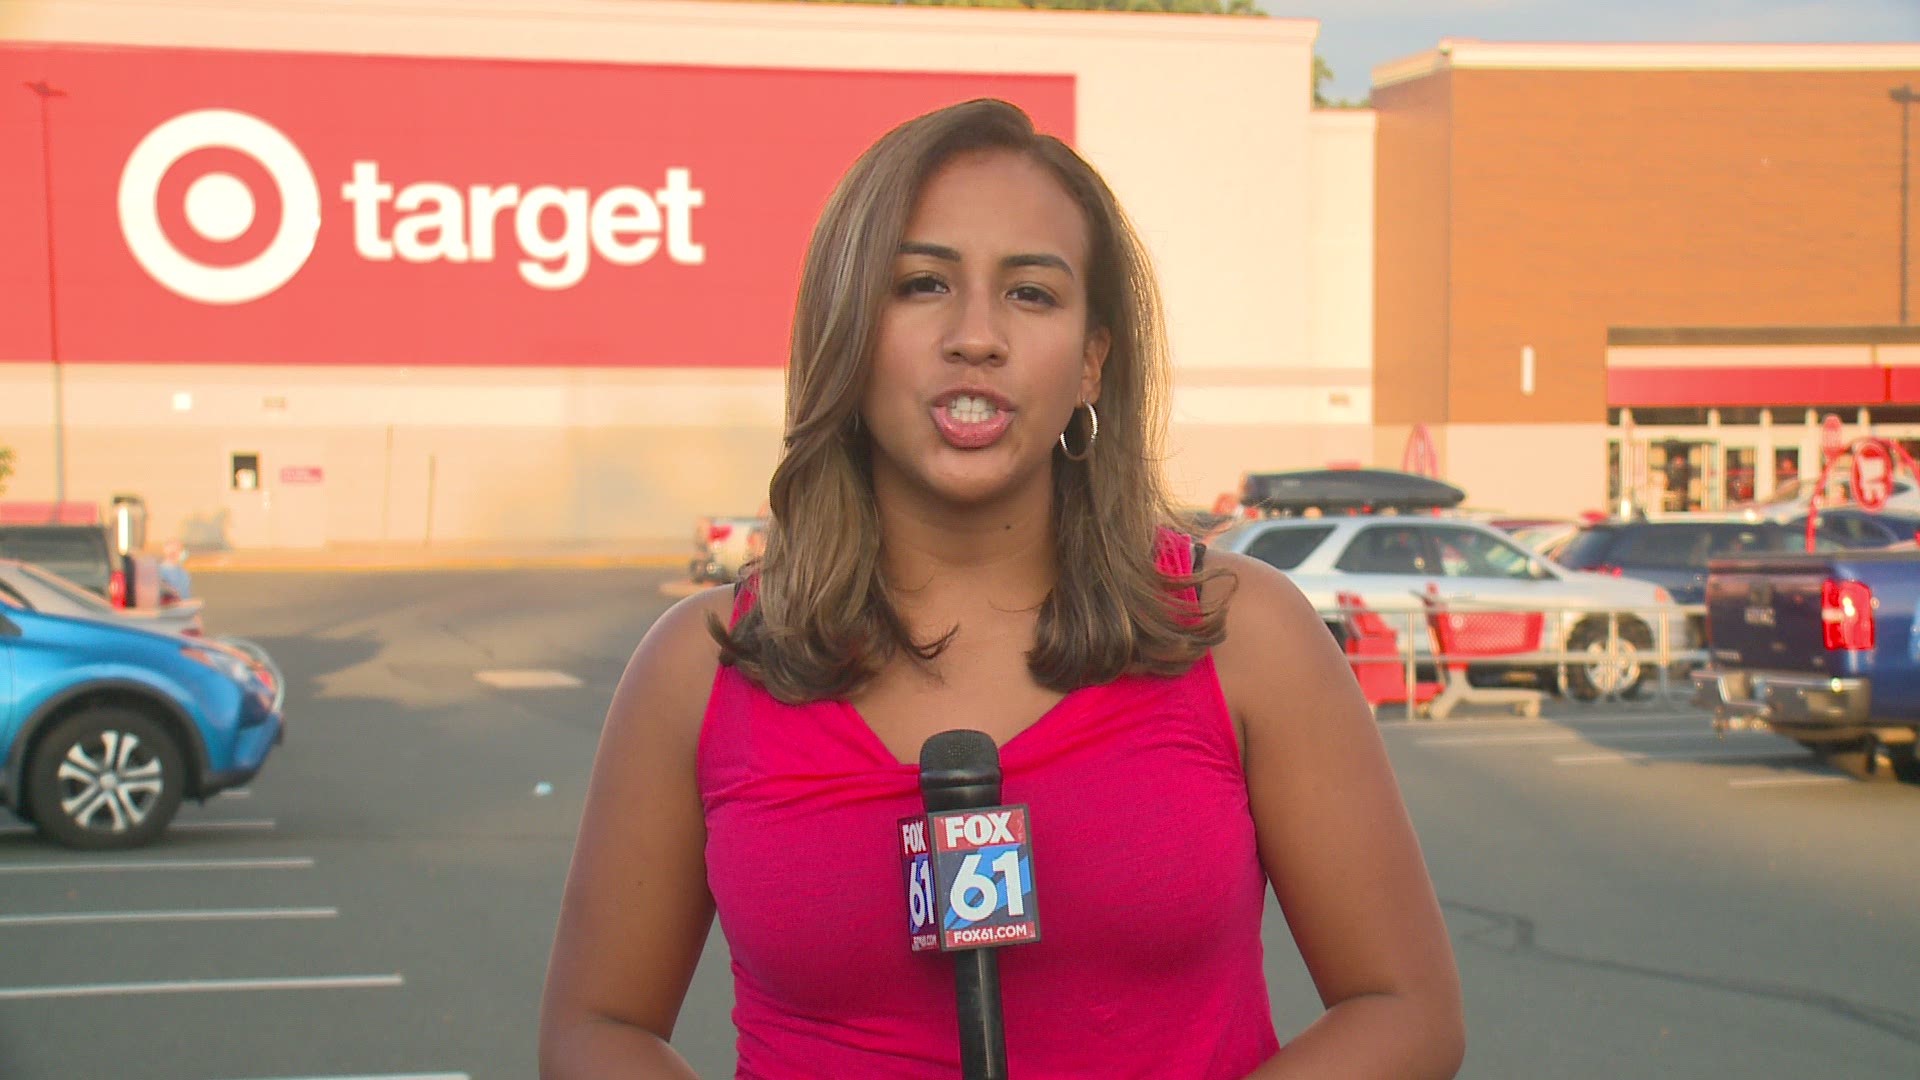 Target did not comment specifically about the manager but said it was an issue of miscommunication. Another fundraiser will be held on August 15 and 16.